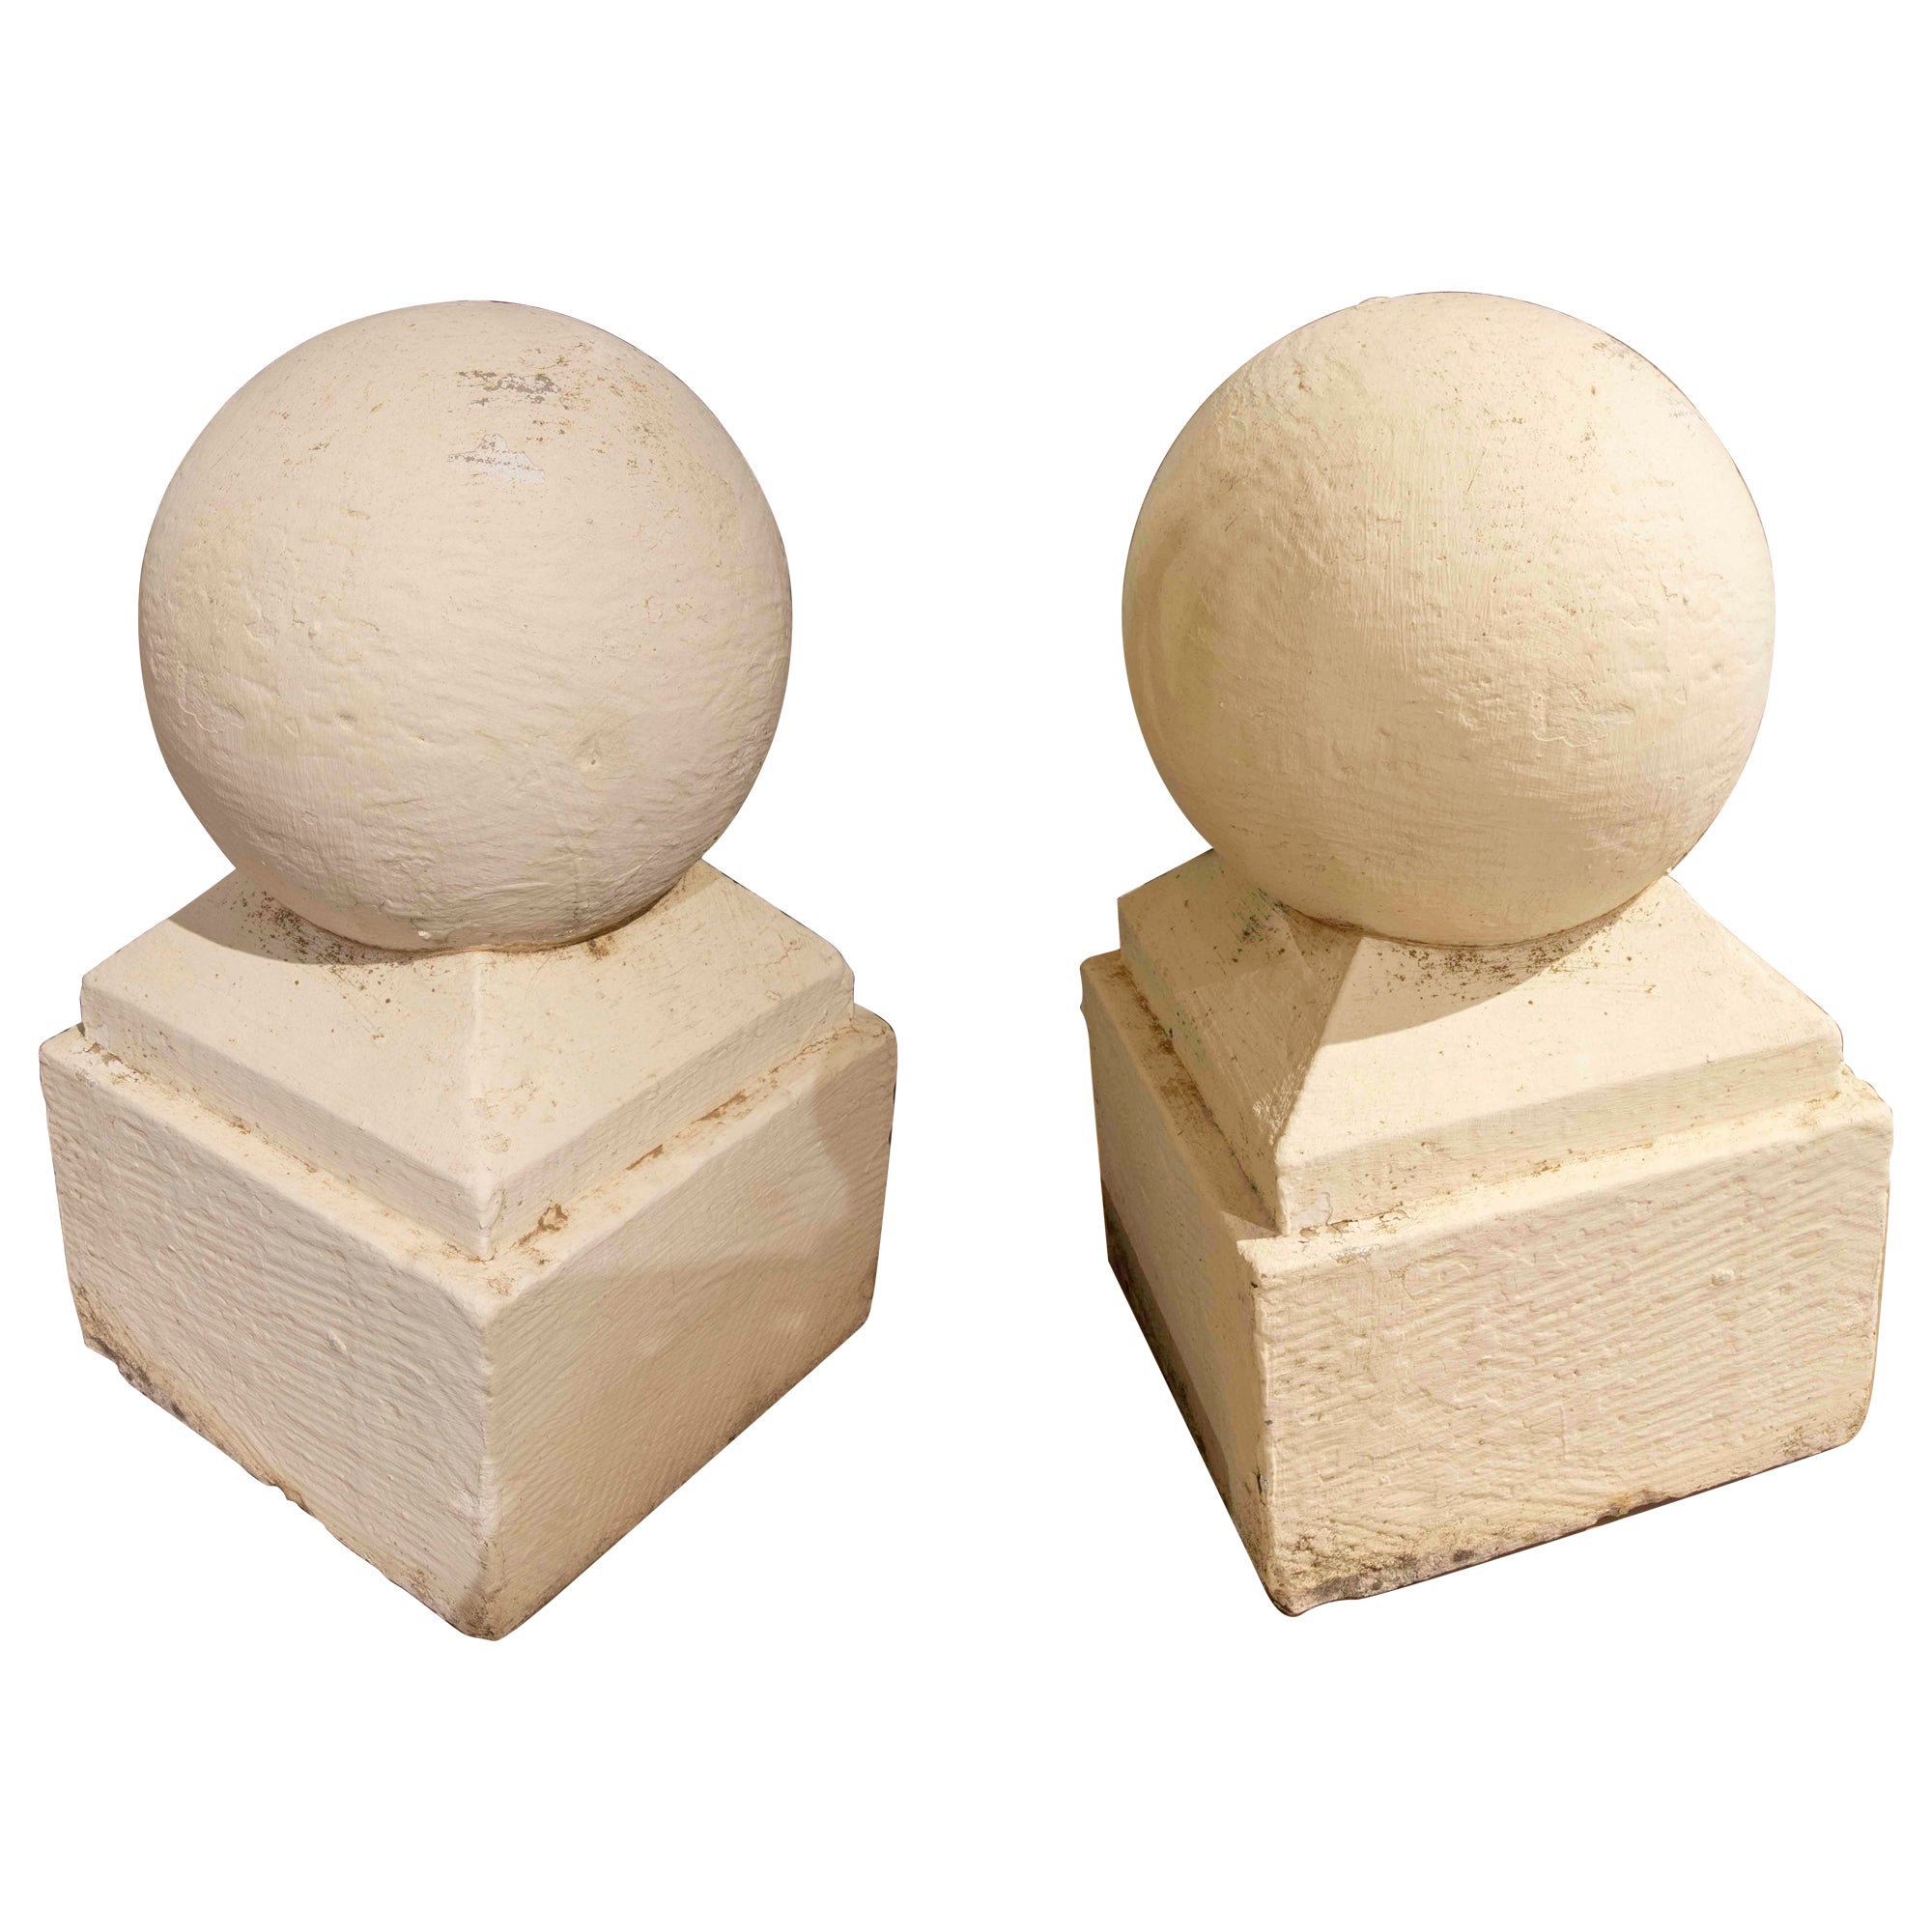 Pair of Whitewashed Ball-Shaped Cement Finials